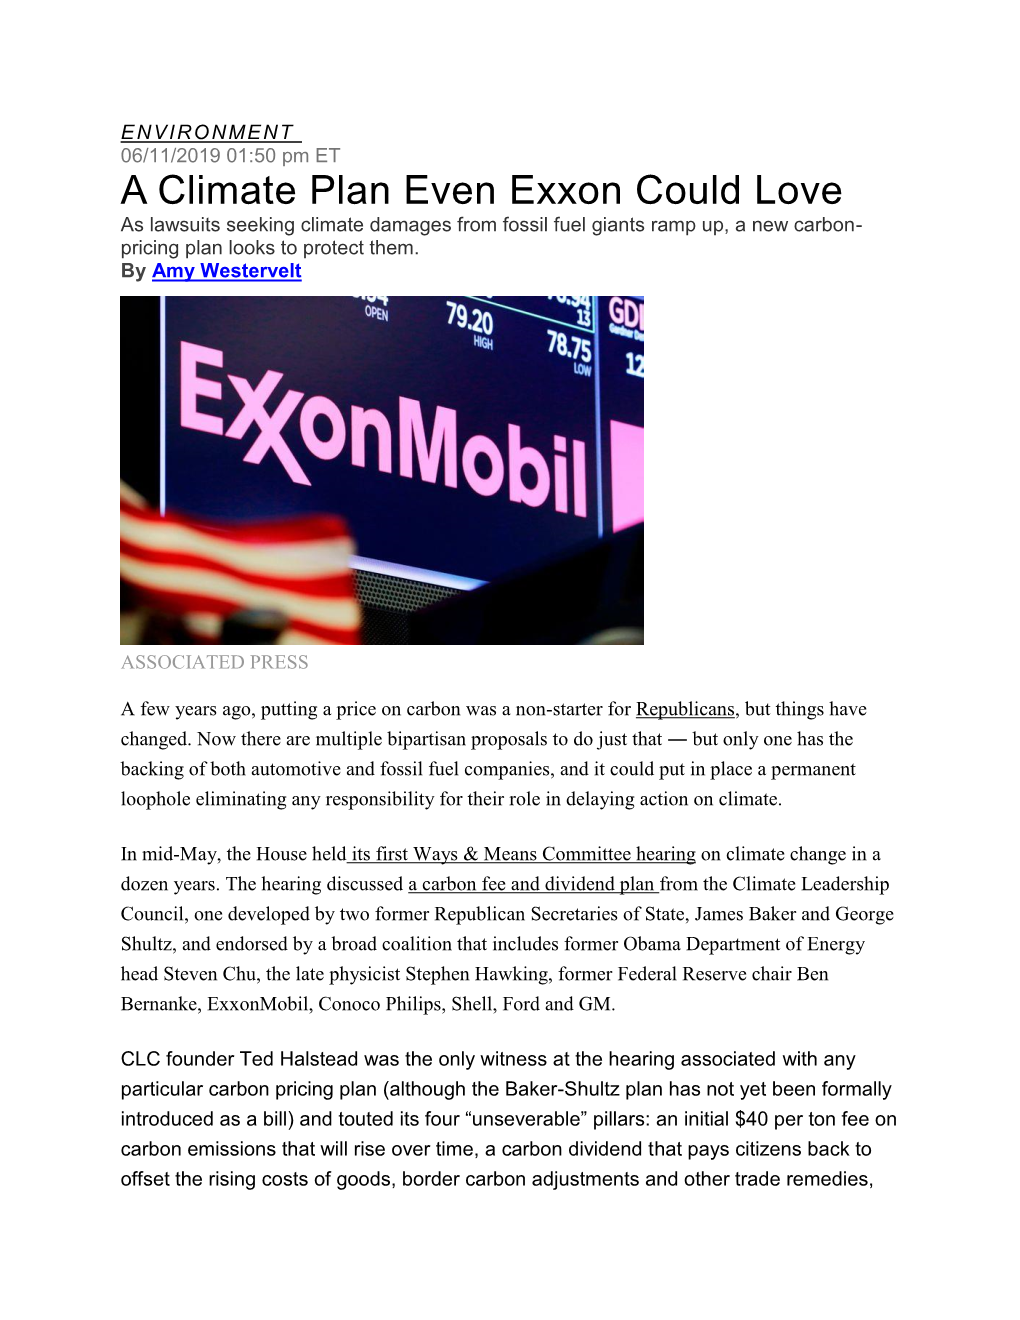 A Climate Plan Even Exxon Could Love As Lawsuits Seeking Climate Damages from Fossil Fuel Giants Ramp Up, a New Carbon- Pricing Plan Looks to Protect Them